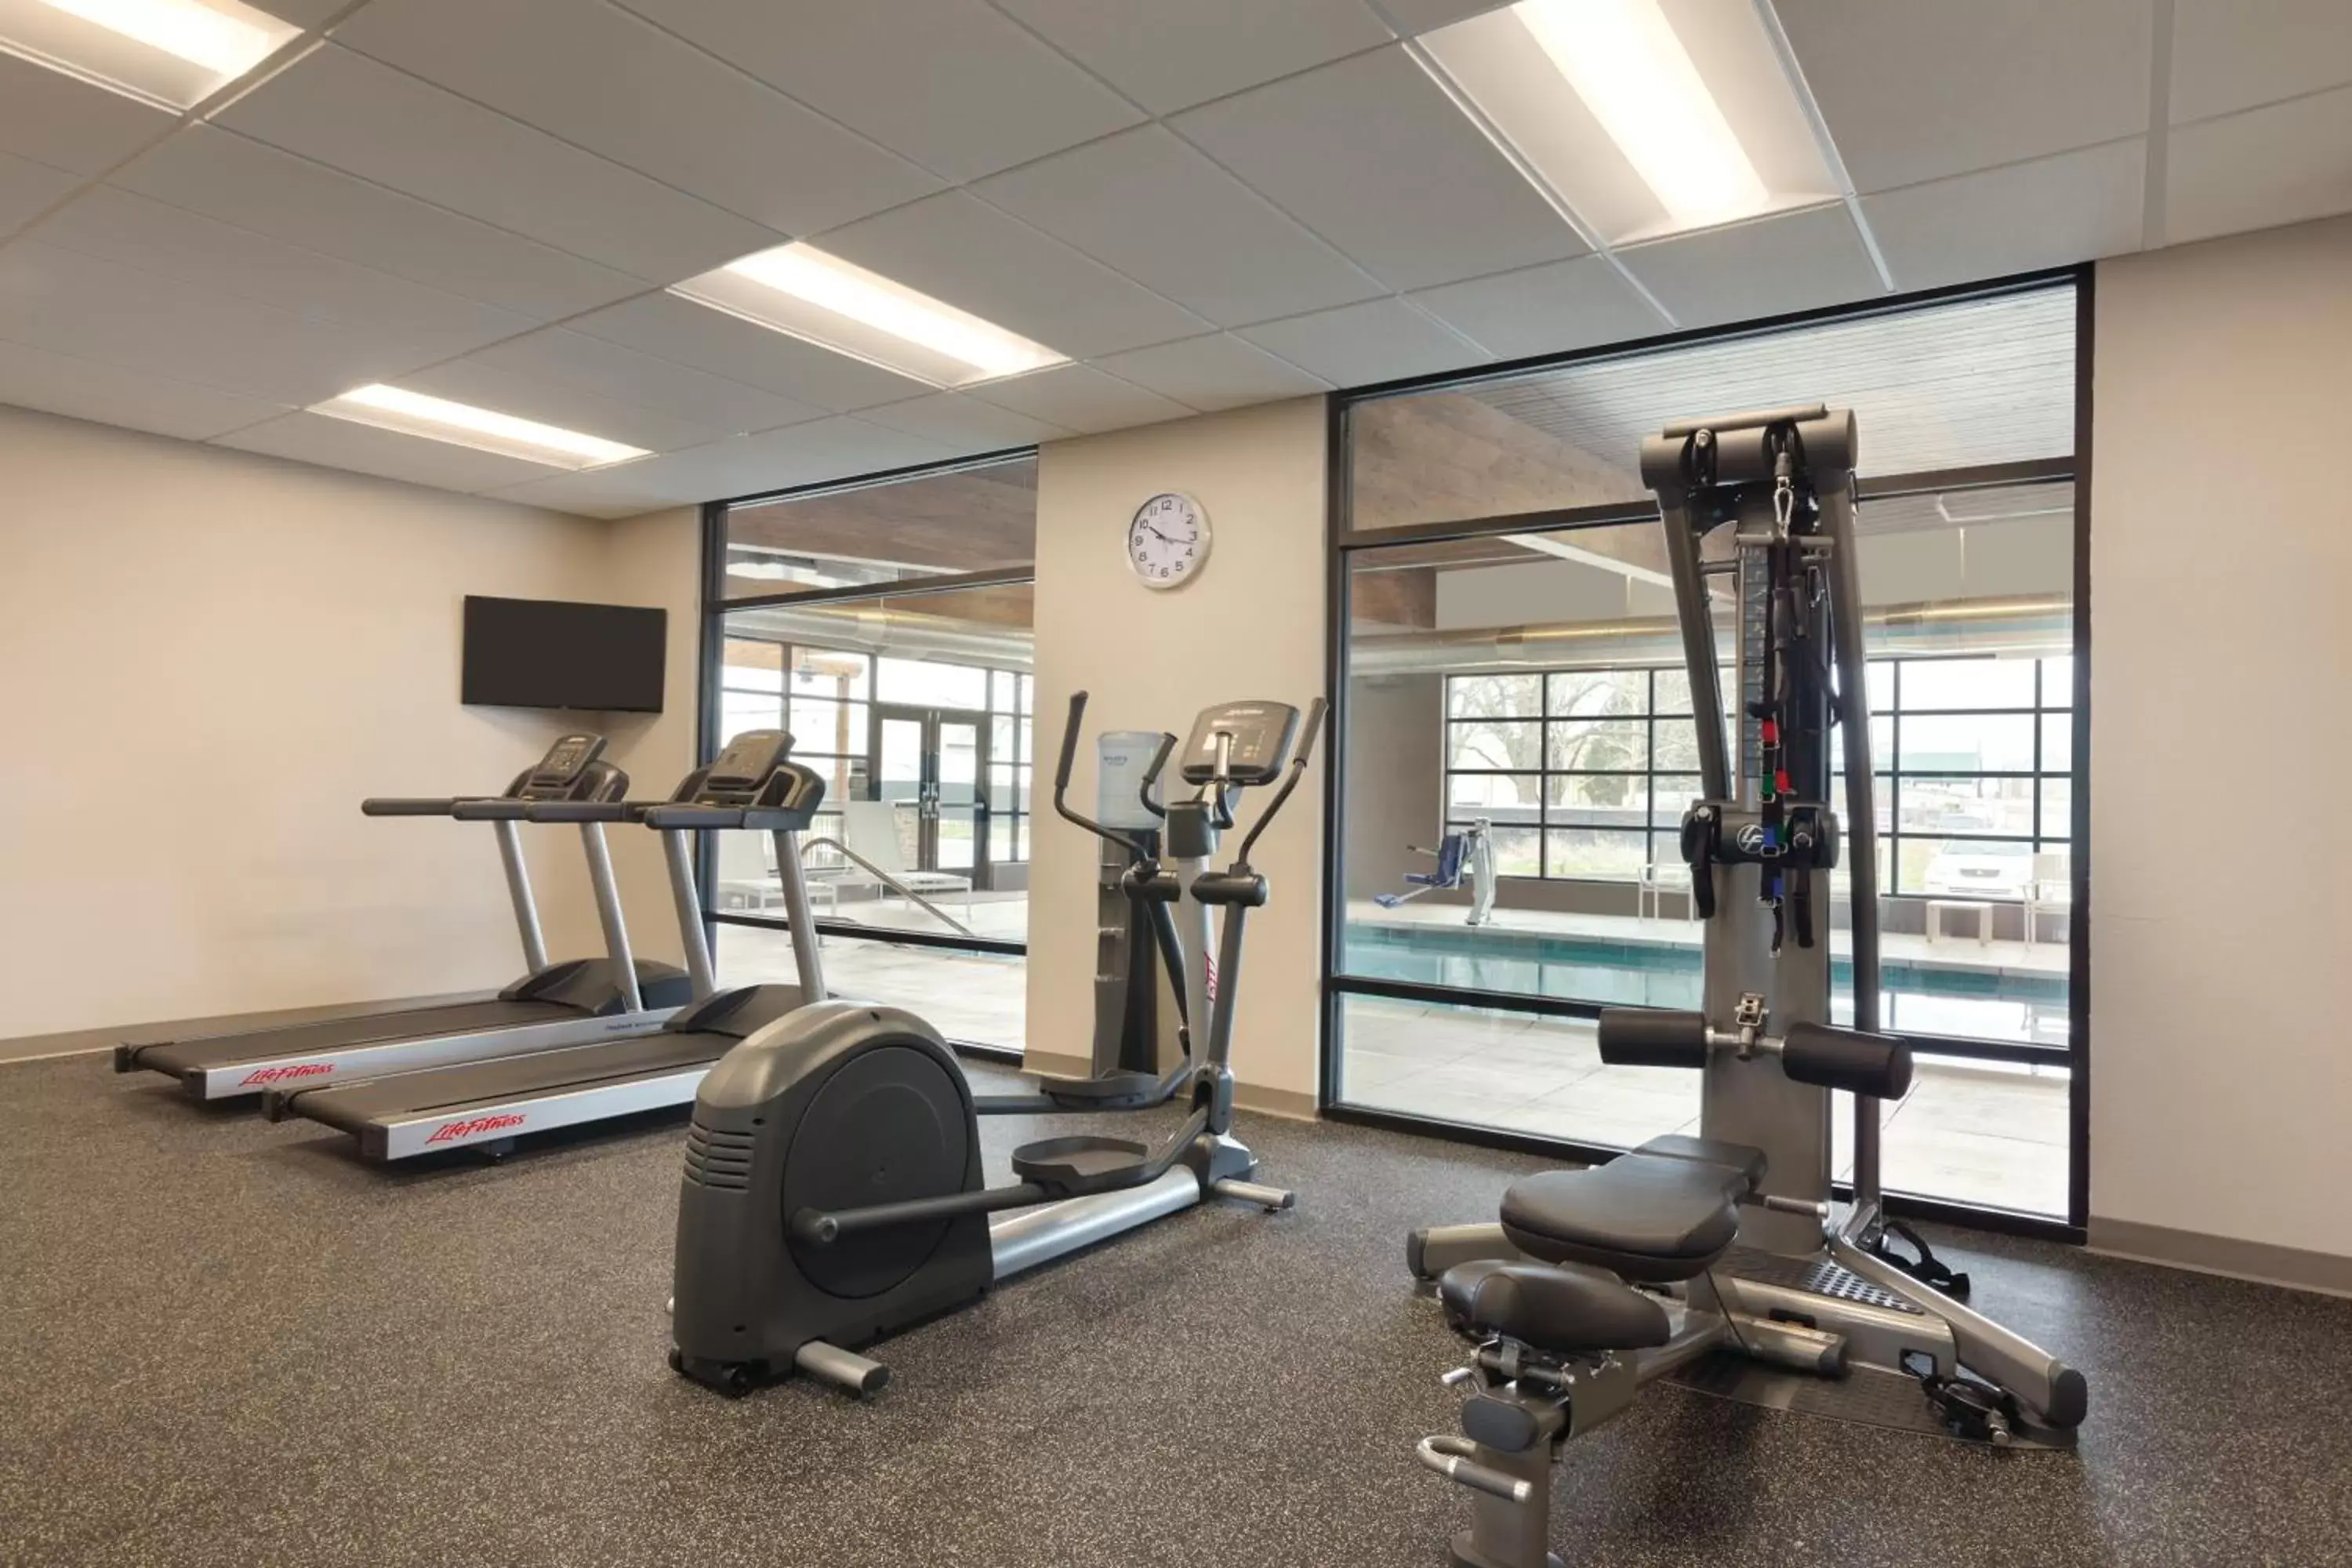 Fitness centre/facilities, Fitness Center/Facilities in Country Inn & Suites by Radisson, Lawrence, KS